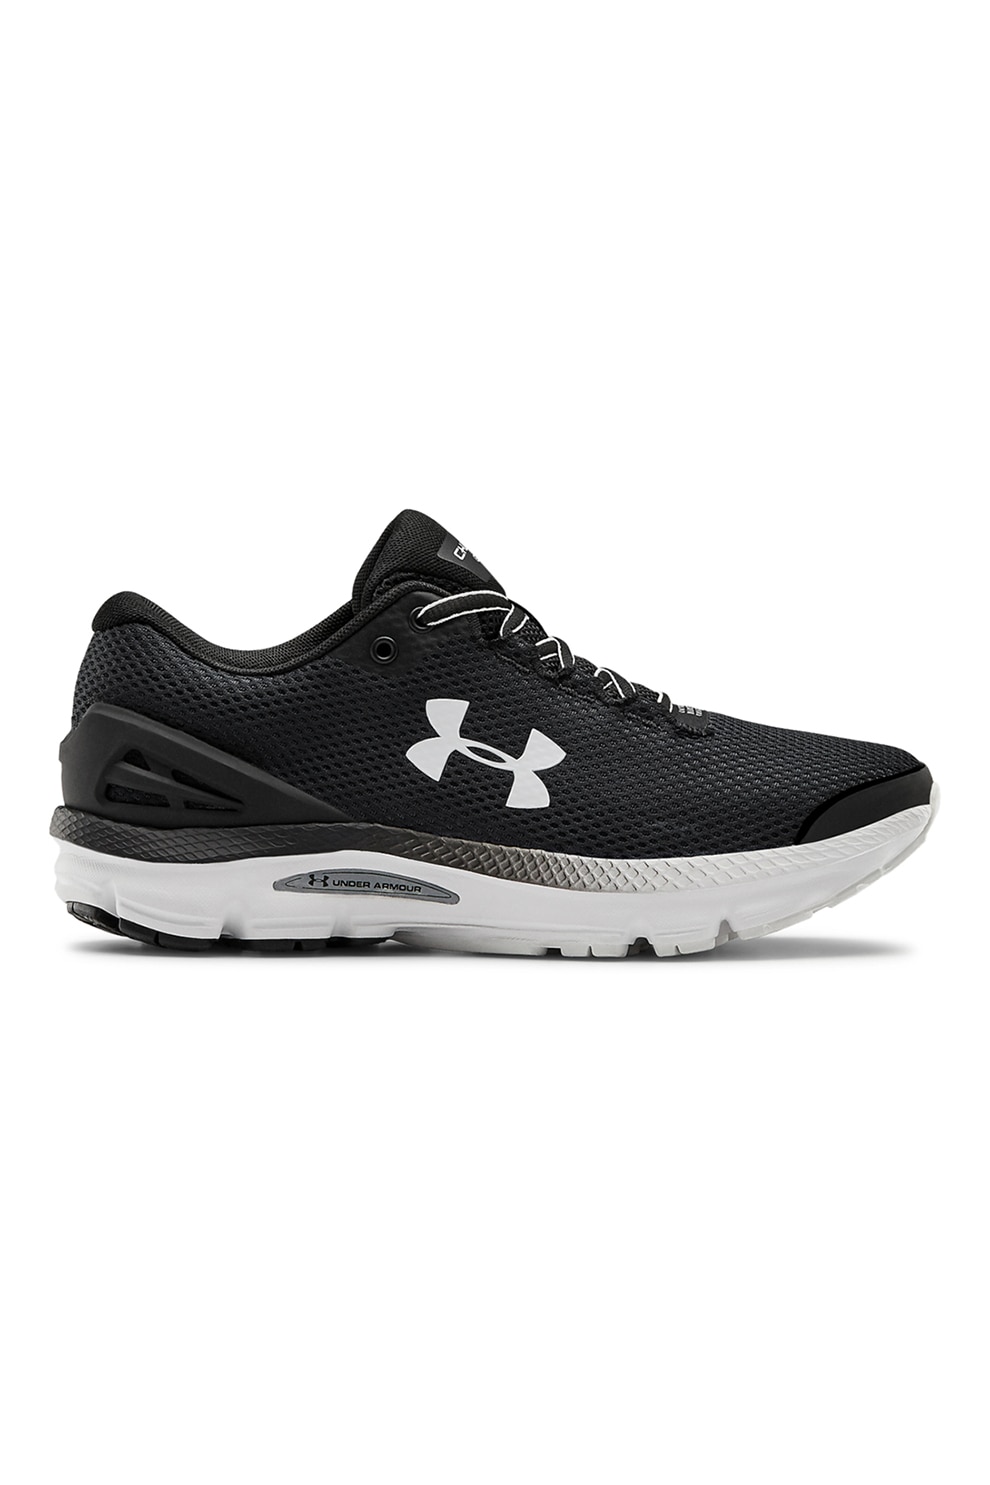 Under Armour Women's Charged Gemini 2020 Running Shoes 3023277 106 ...